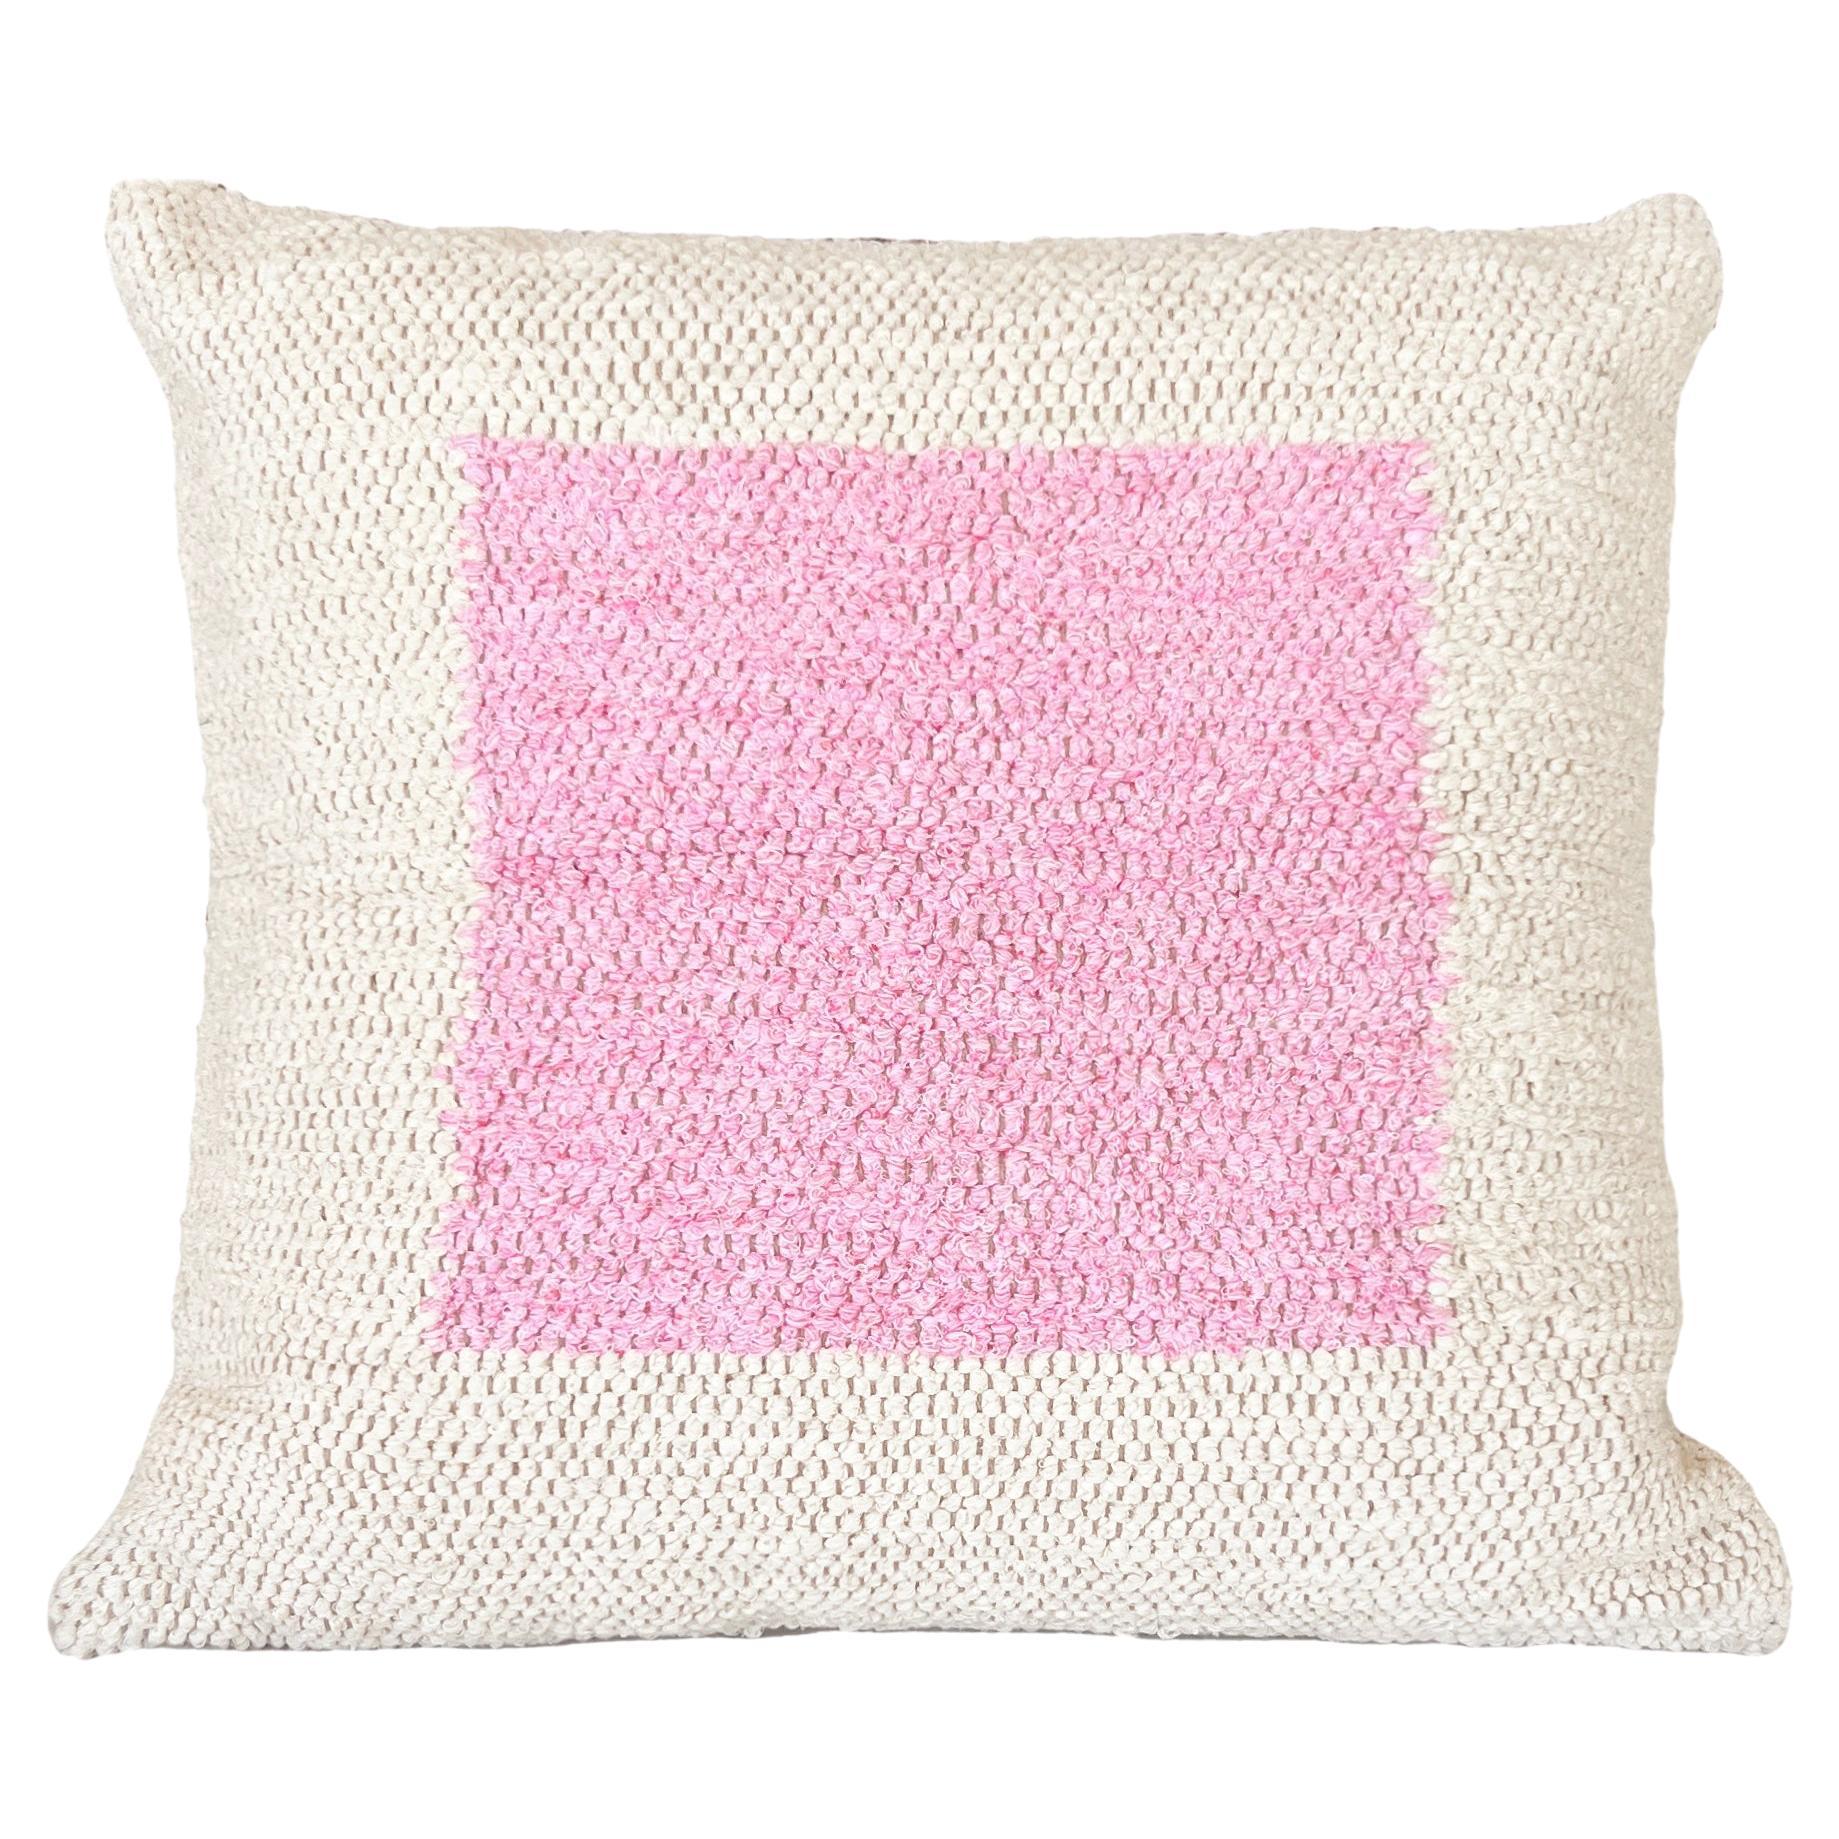 Casa Cubista Handwoven Cotton Pink Square Throw Pillow, in Stock For Sale